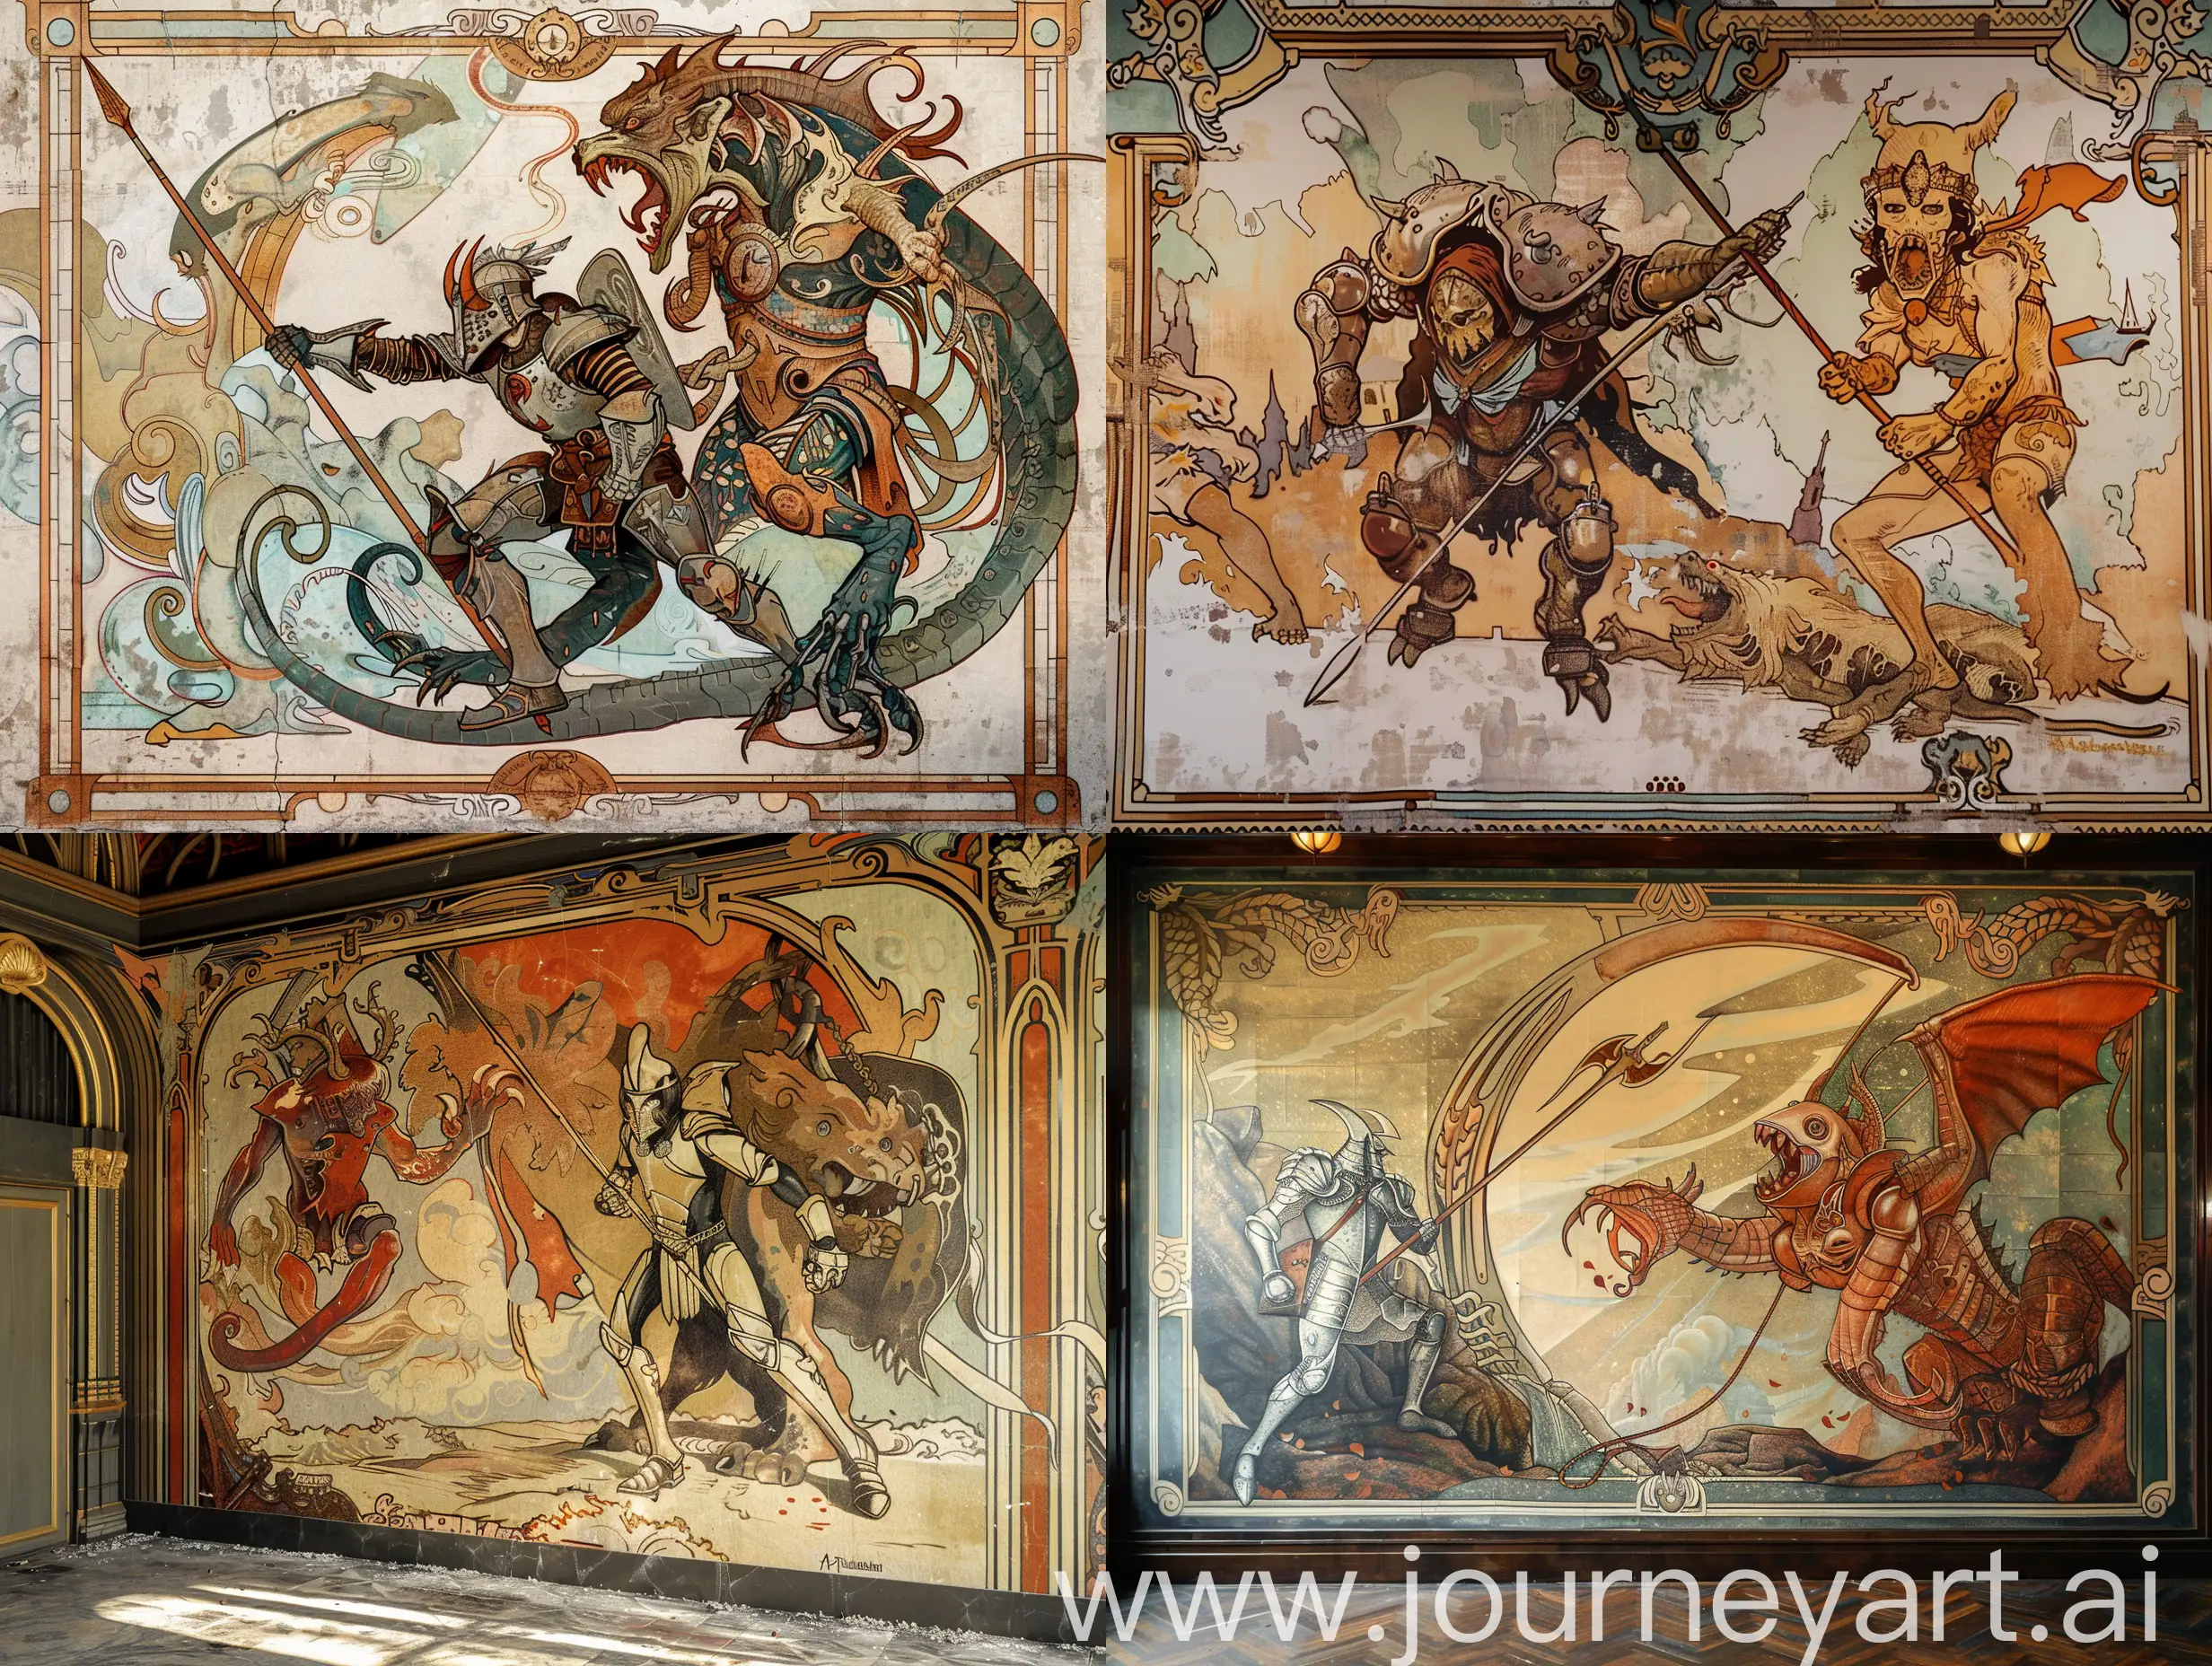 Epic-Battle-Mural-Warrior-Confronts-TwoHeaded-Monster-in-Stunning-Art-Nouveau-Style